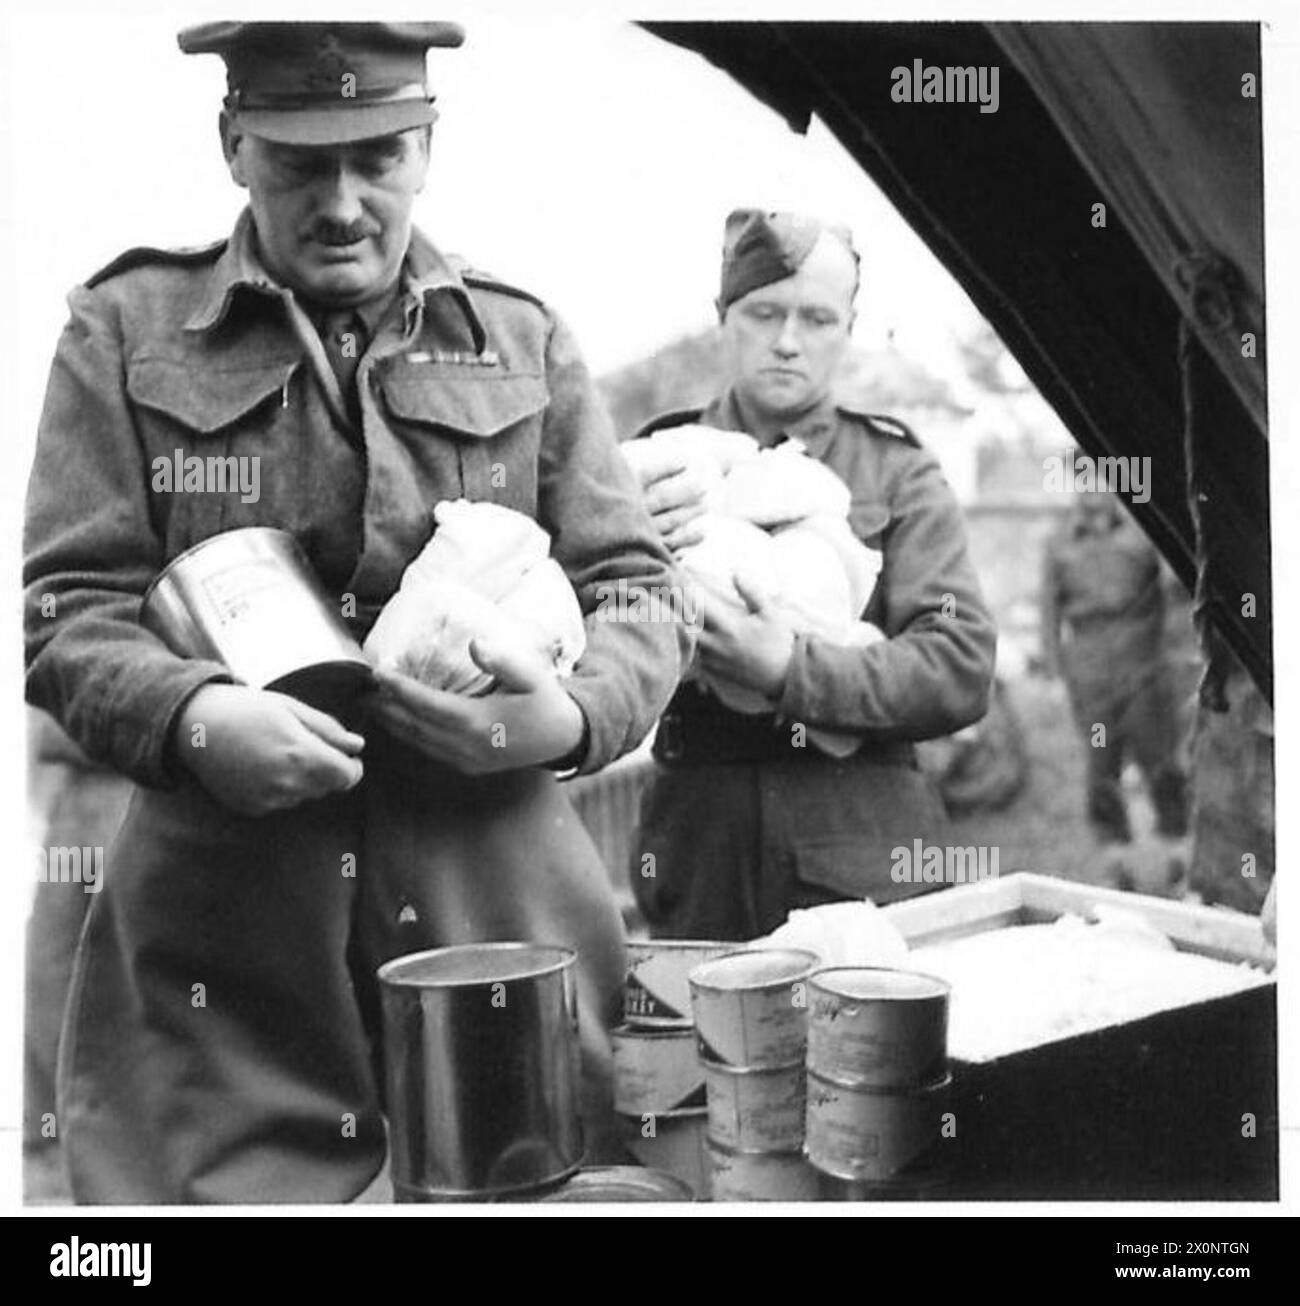 THE BRITISH ARMY IN NORTH AFRICA, SICILY, ITALY, THE BALKANS AND AUSTRIA 1942-1946 - Loading a truck with Christmas Puddings and Mince Meat. Photographic negative , British Army Stock Photo